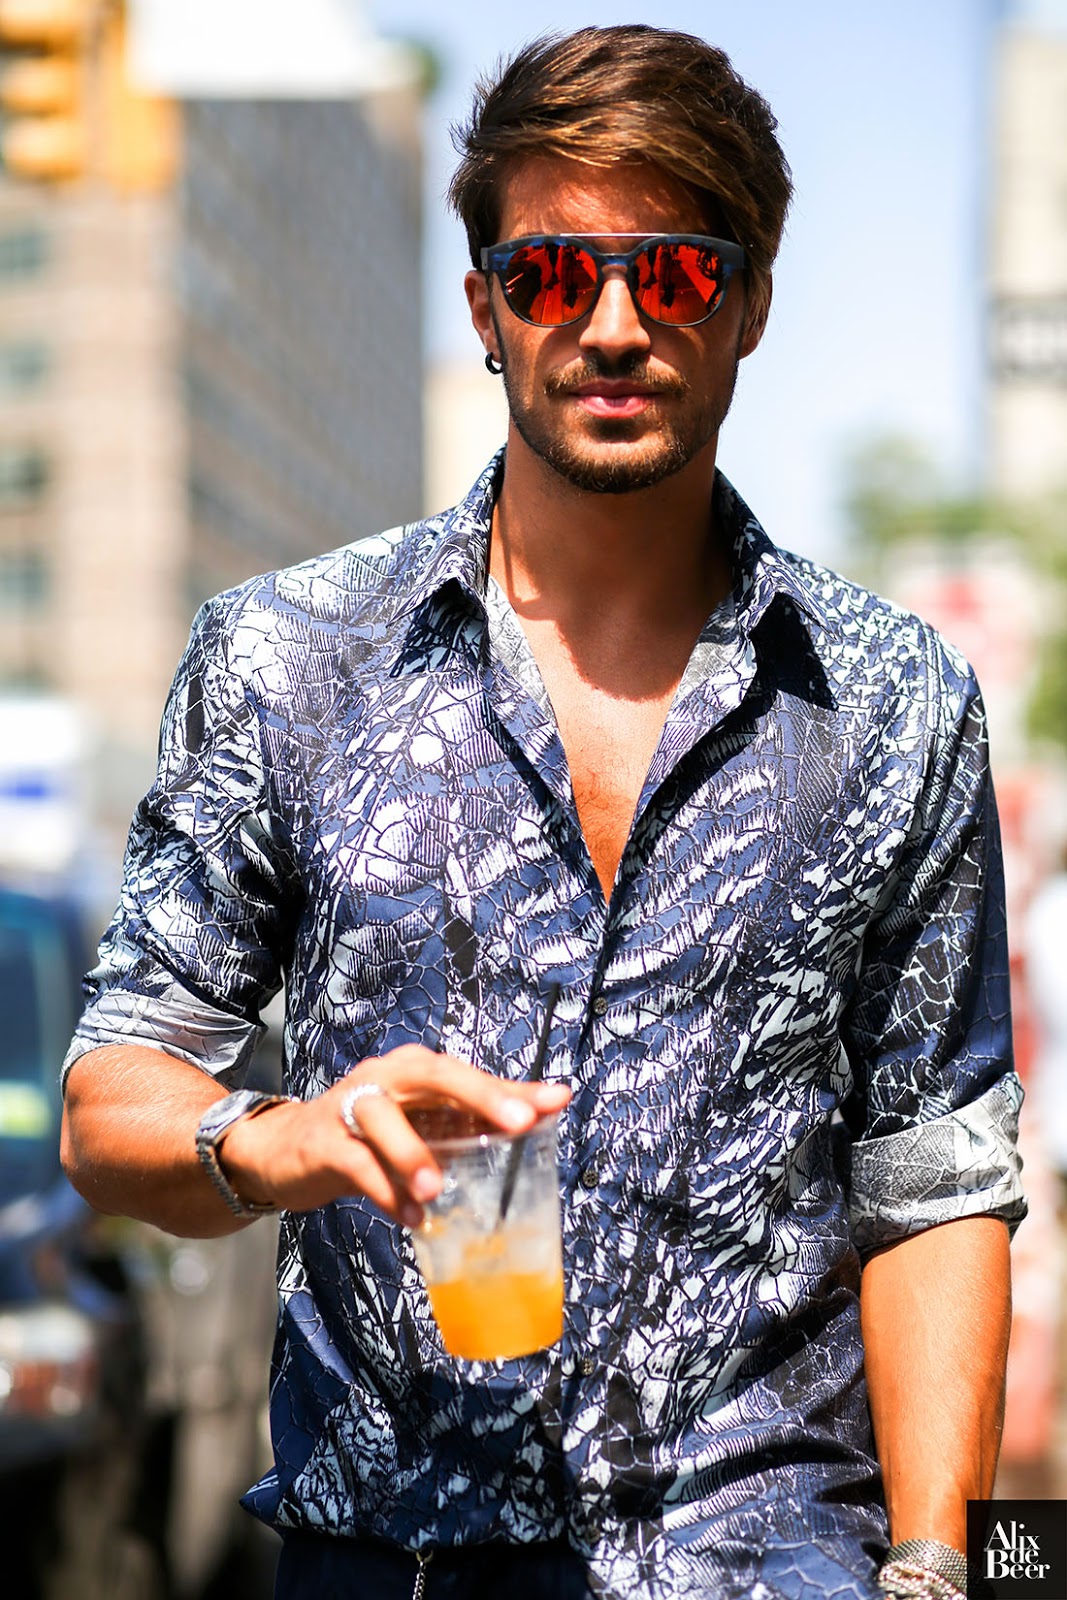 All about Hair for Men: MARIANO DI VAIO